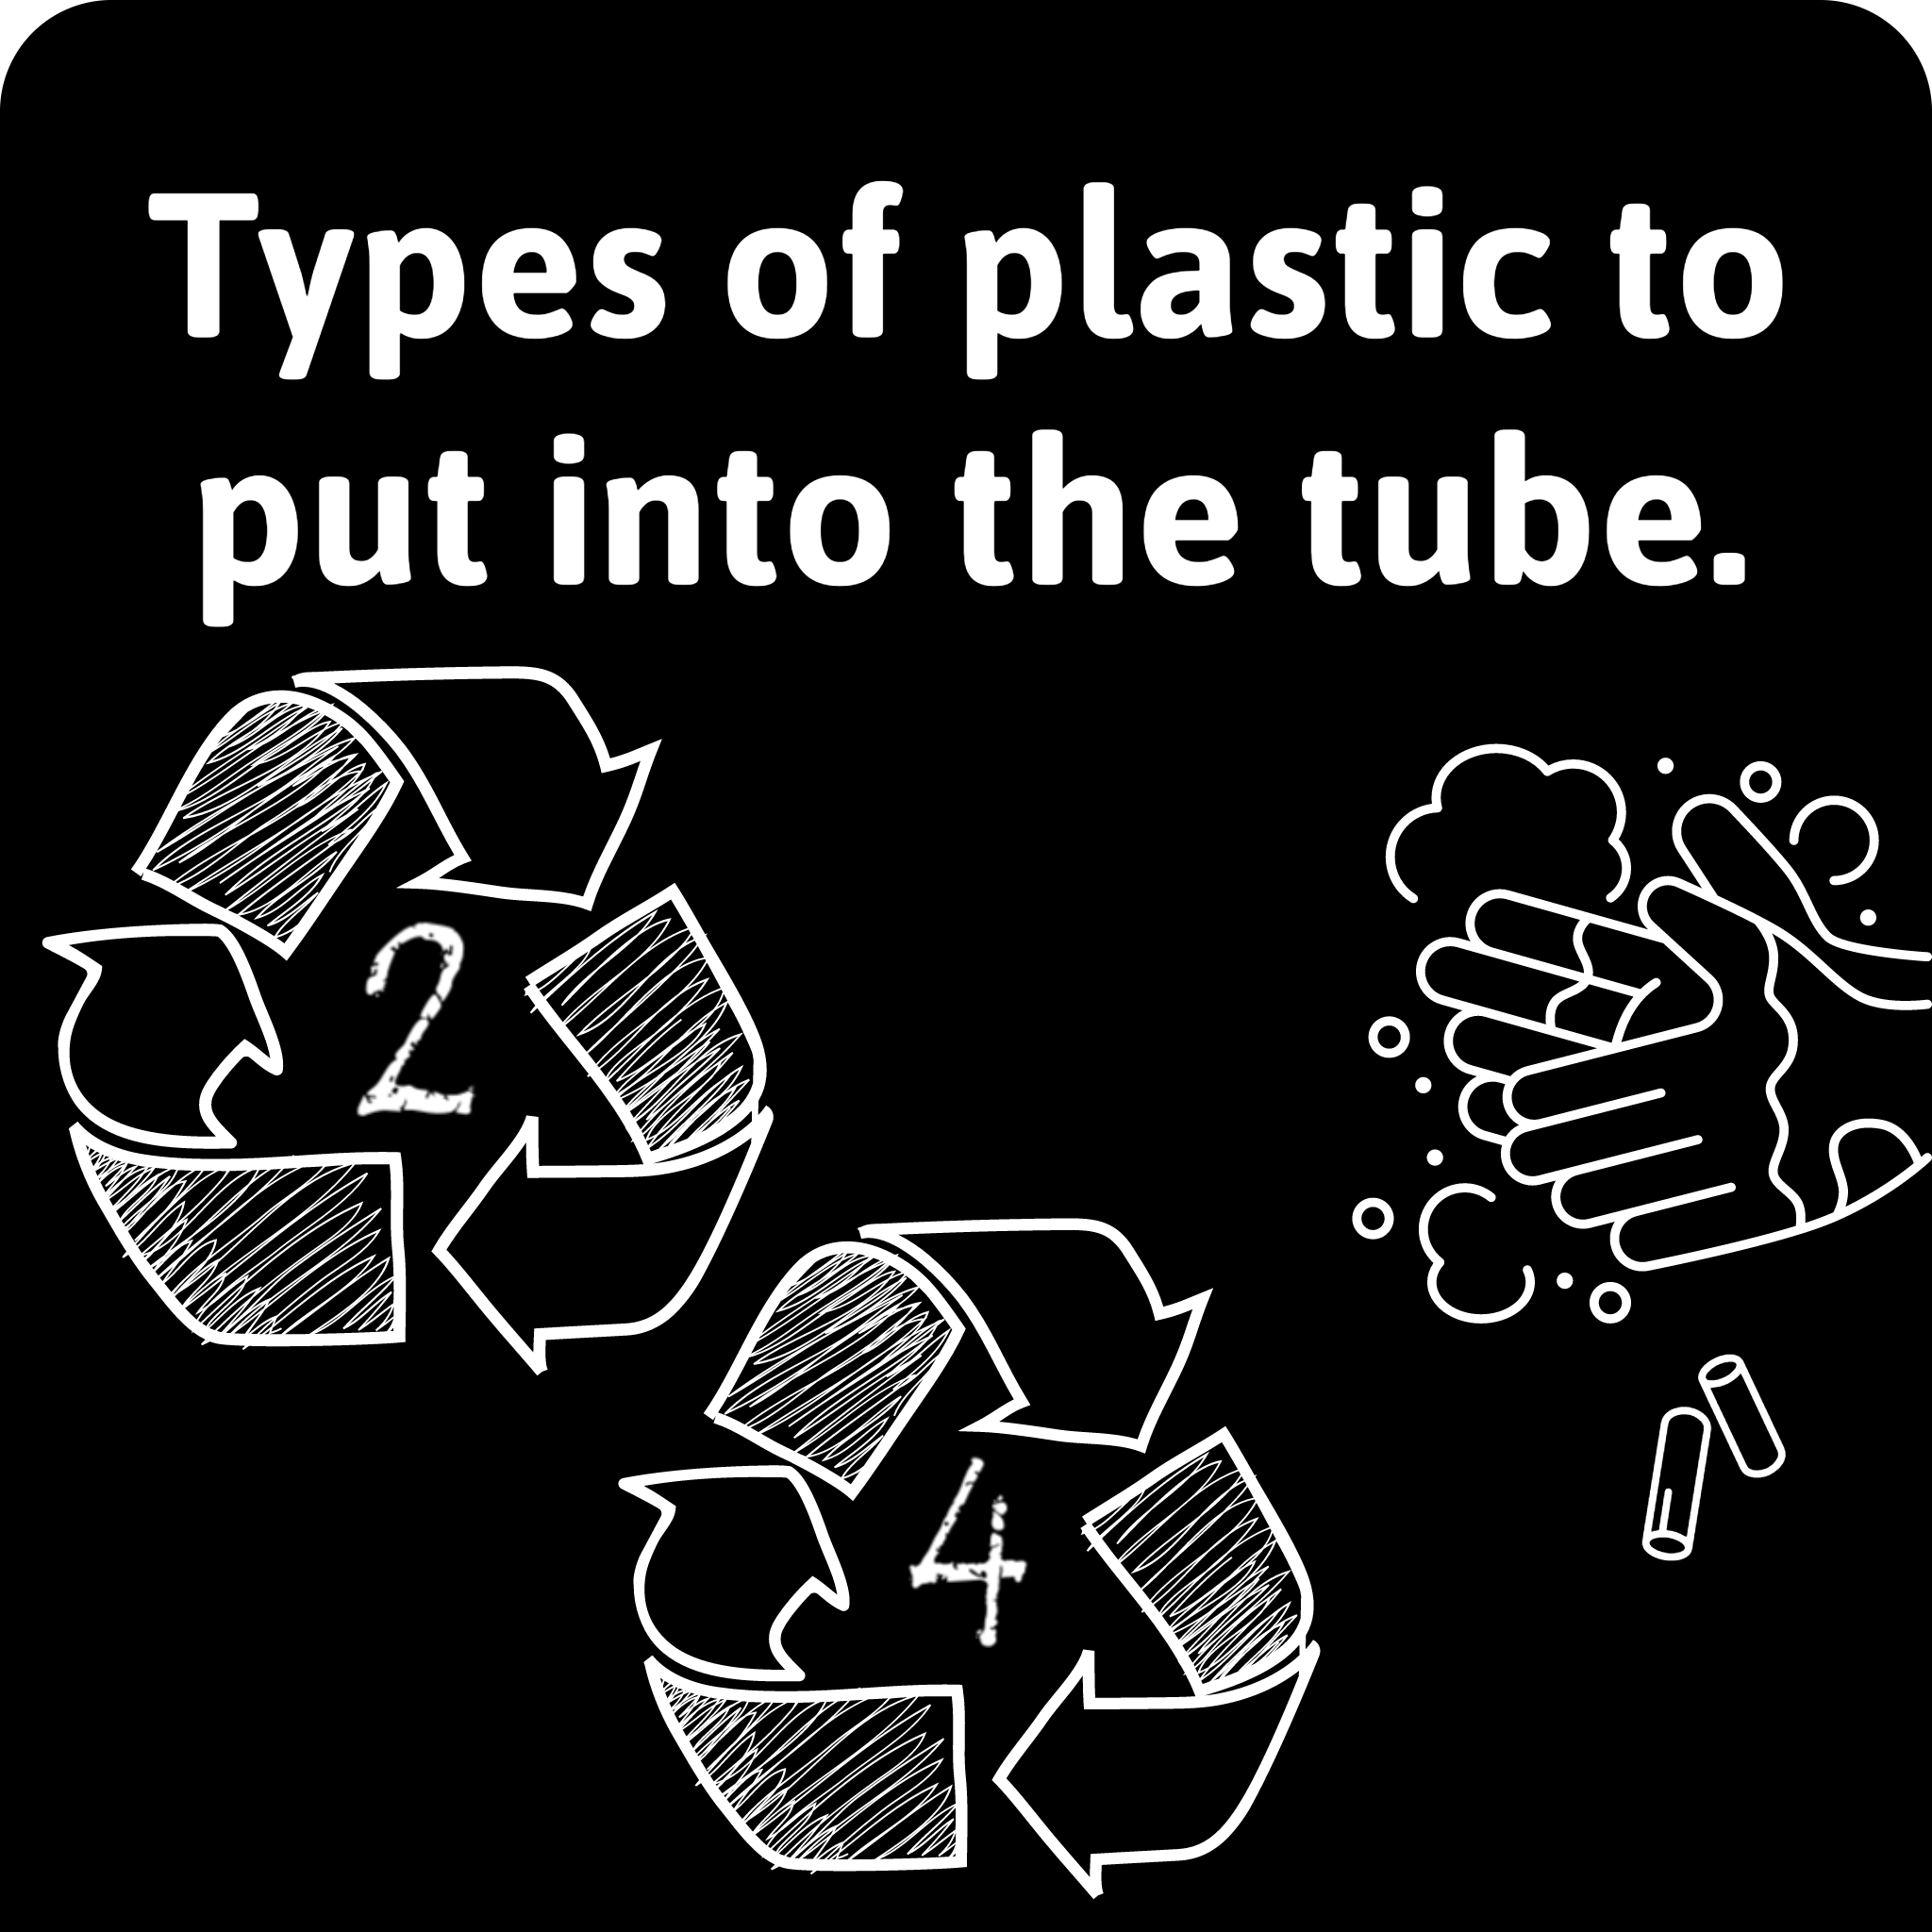 Types of plastic to put into the tube is the text on this image. White text on a black background. White drawn recycling logos with arrows for 2 and 4 plastic types. Hands with chalk on the right.